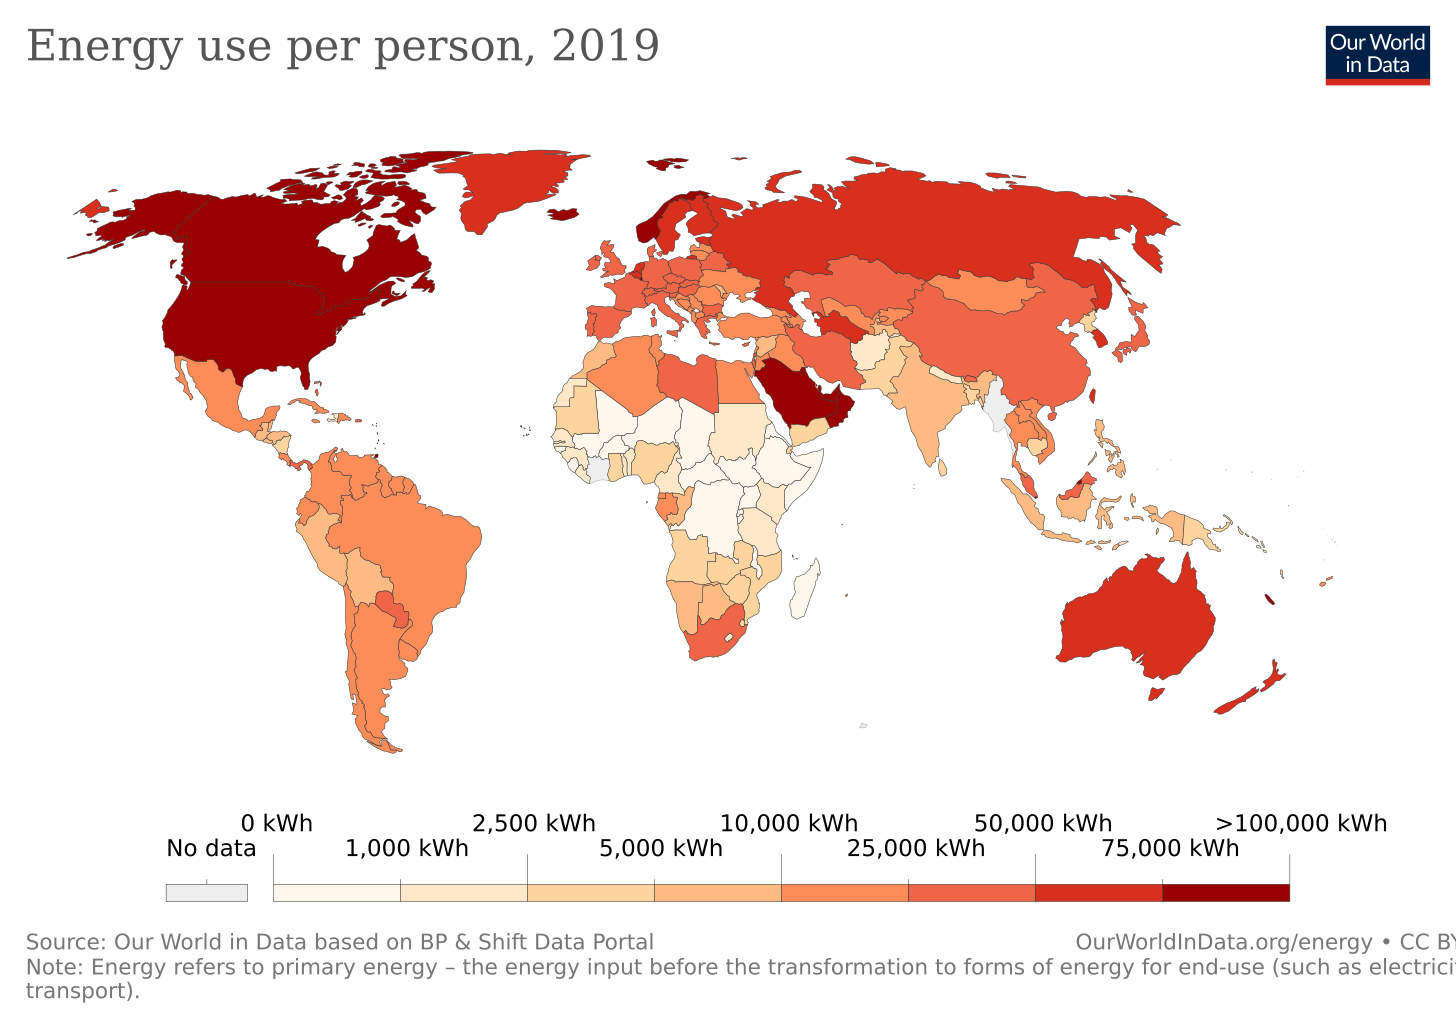 Energy use per person - Our World in Data